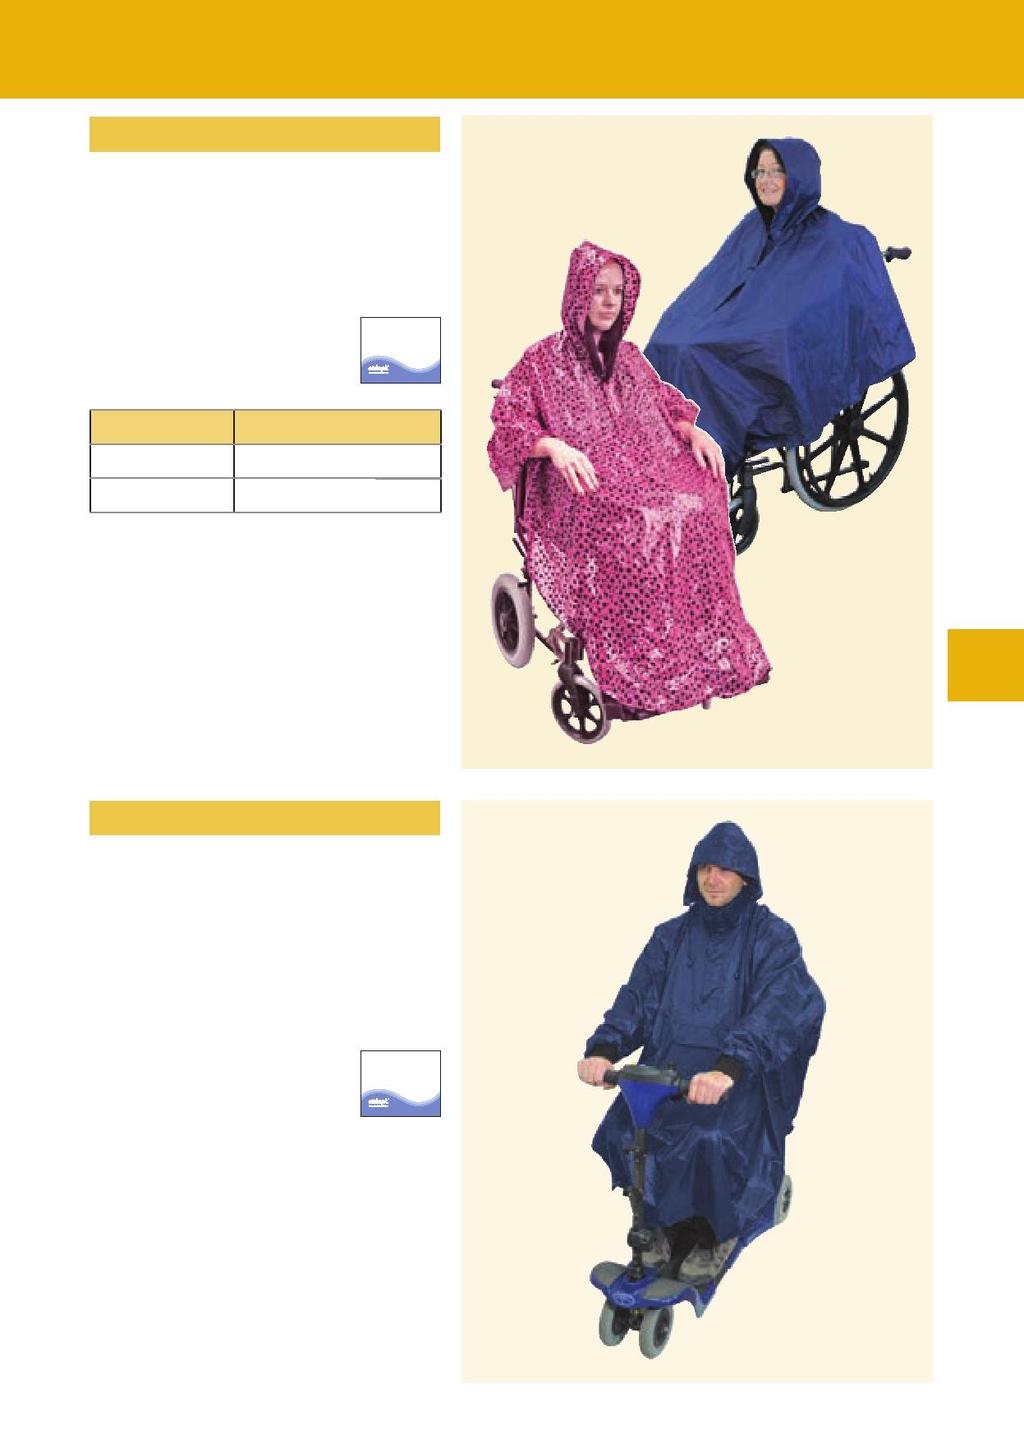 Wheelchair Poncho Weather protection from unexpected showers for you and your wheelchair Universal sizing with zip closure and drawstring hood for a snug fit Stay dry with 100% Waterproof fabric